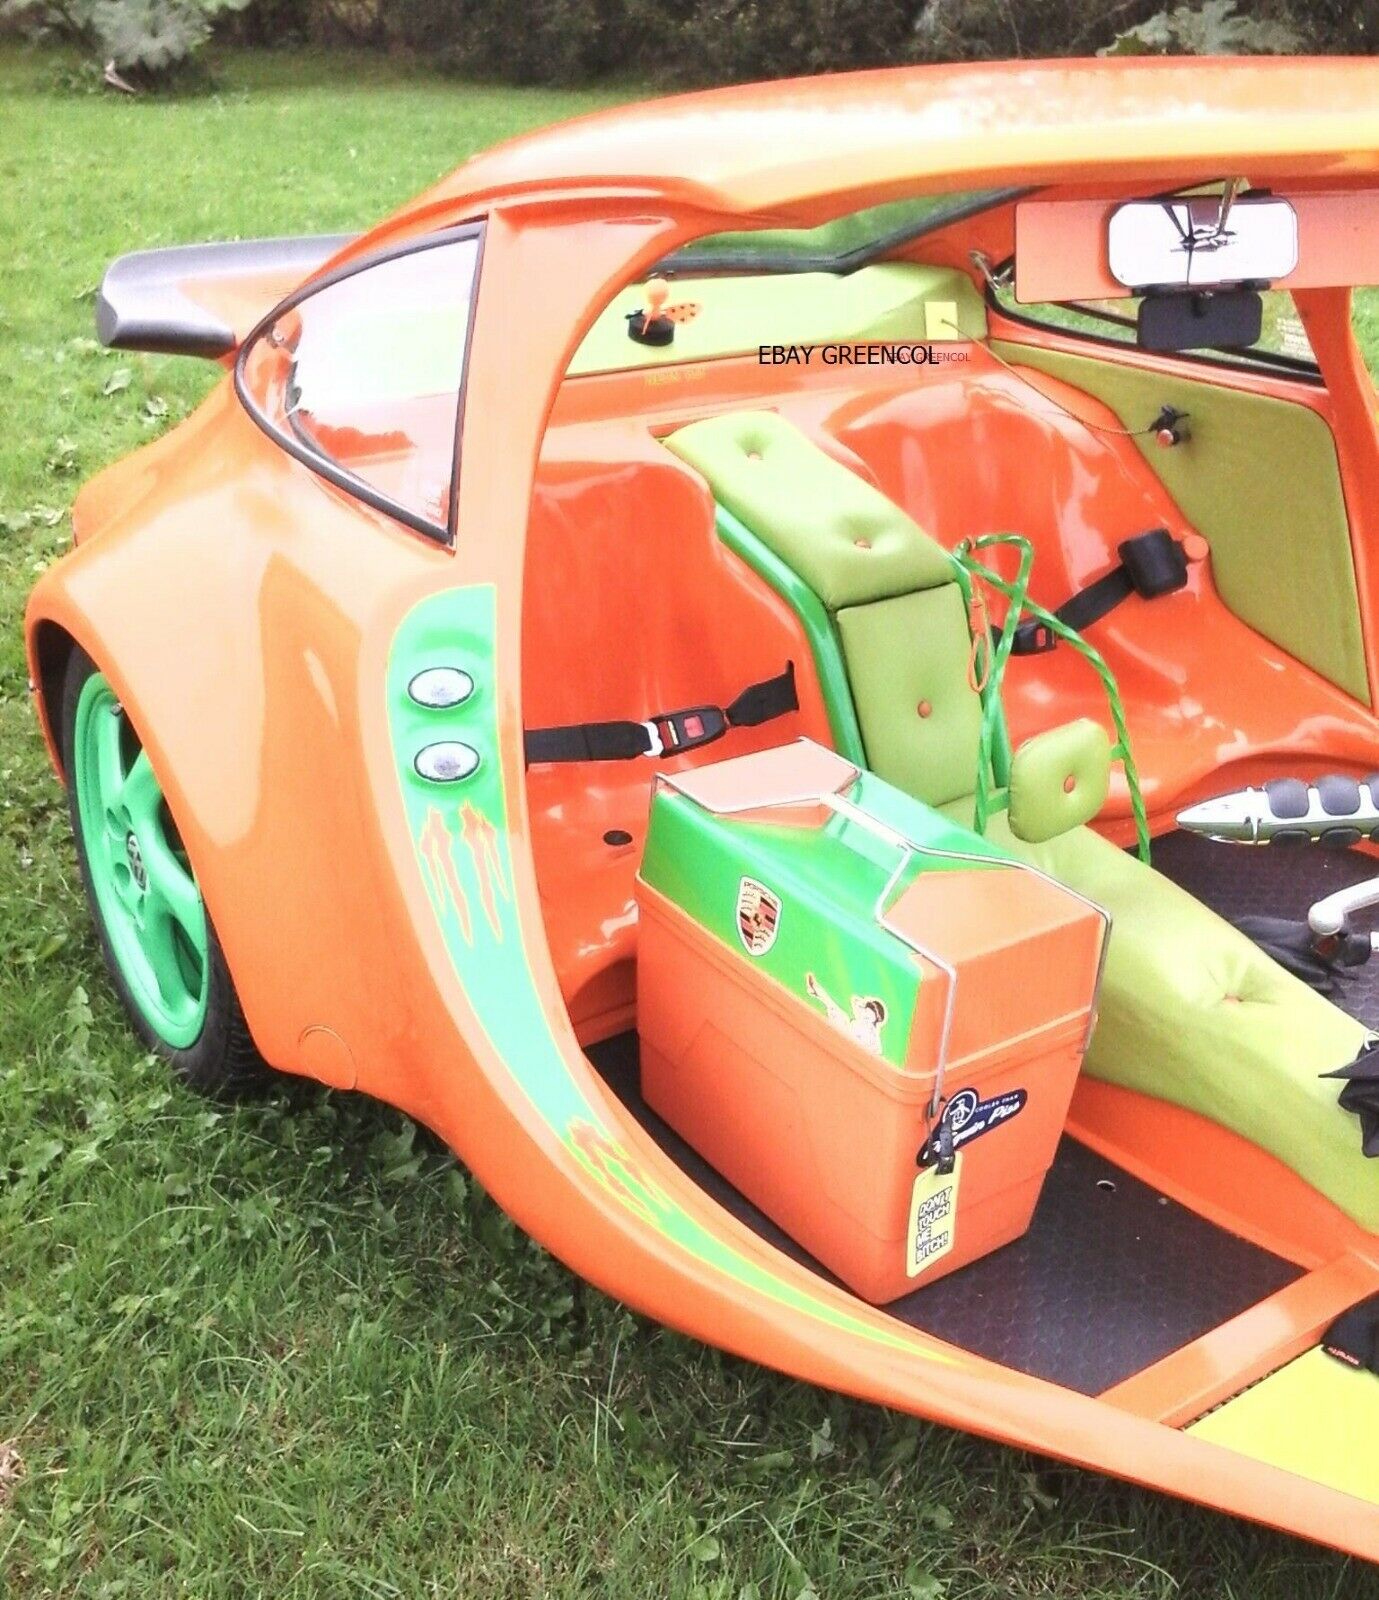 Porsche 911 Turbo Trike Is Real, Up For Grabs on eBay - autoevolution